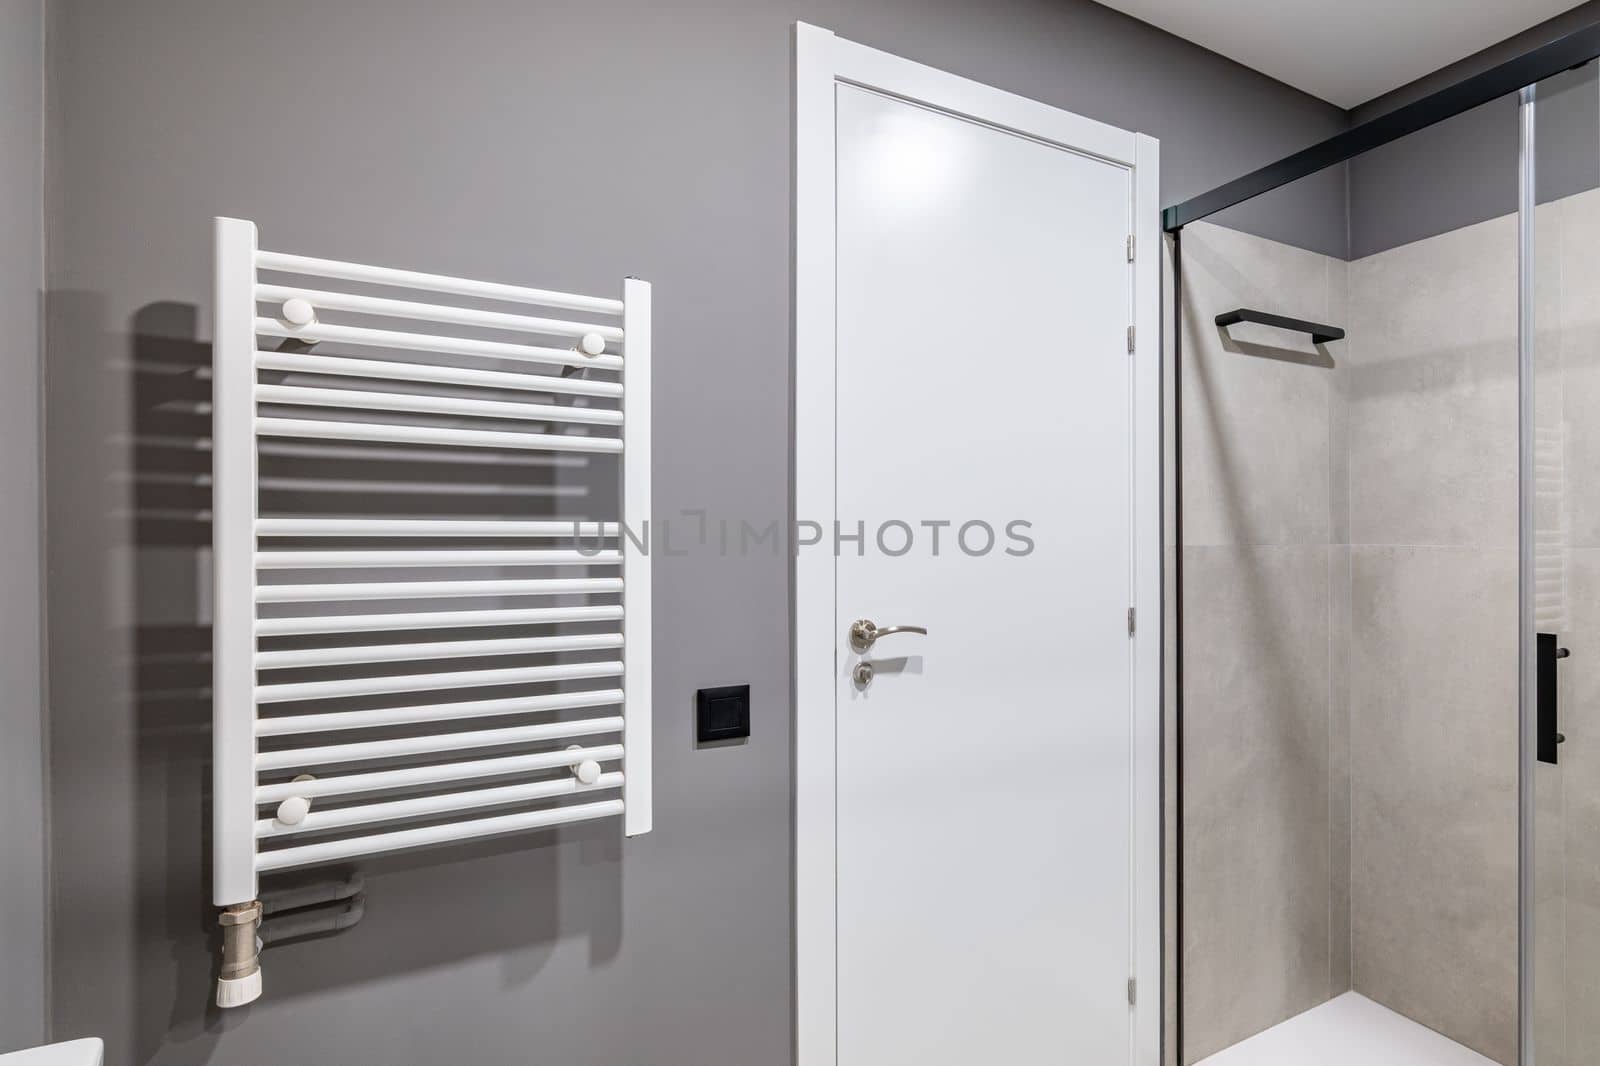 Part of a bathroom with a gray wall. White front door with metal handle. On the wall is a white radiator for drying towels. The shower area is enclosed by sliding glass doors